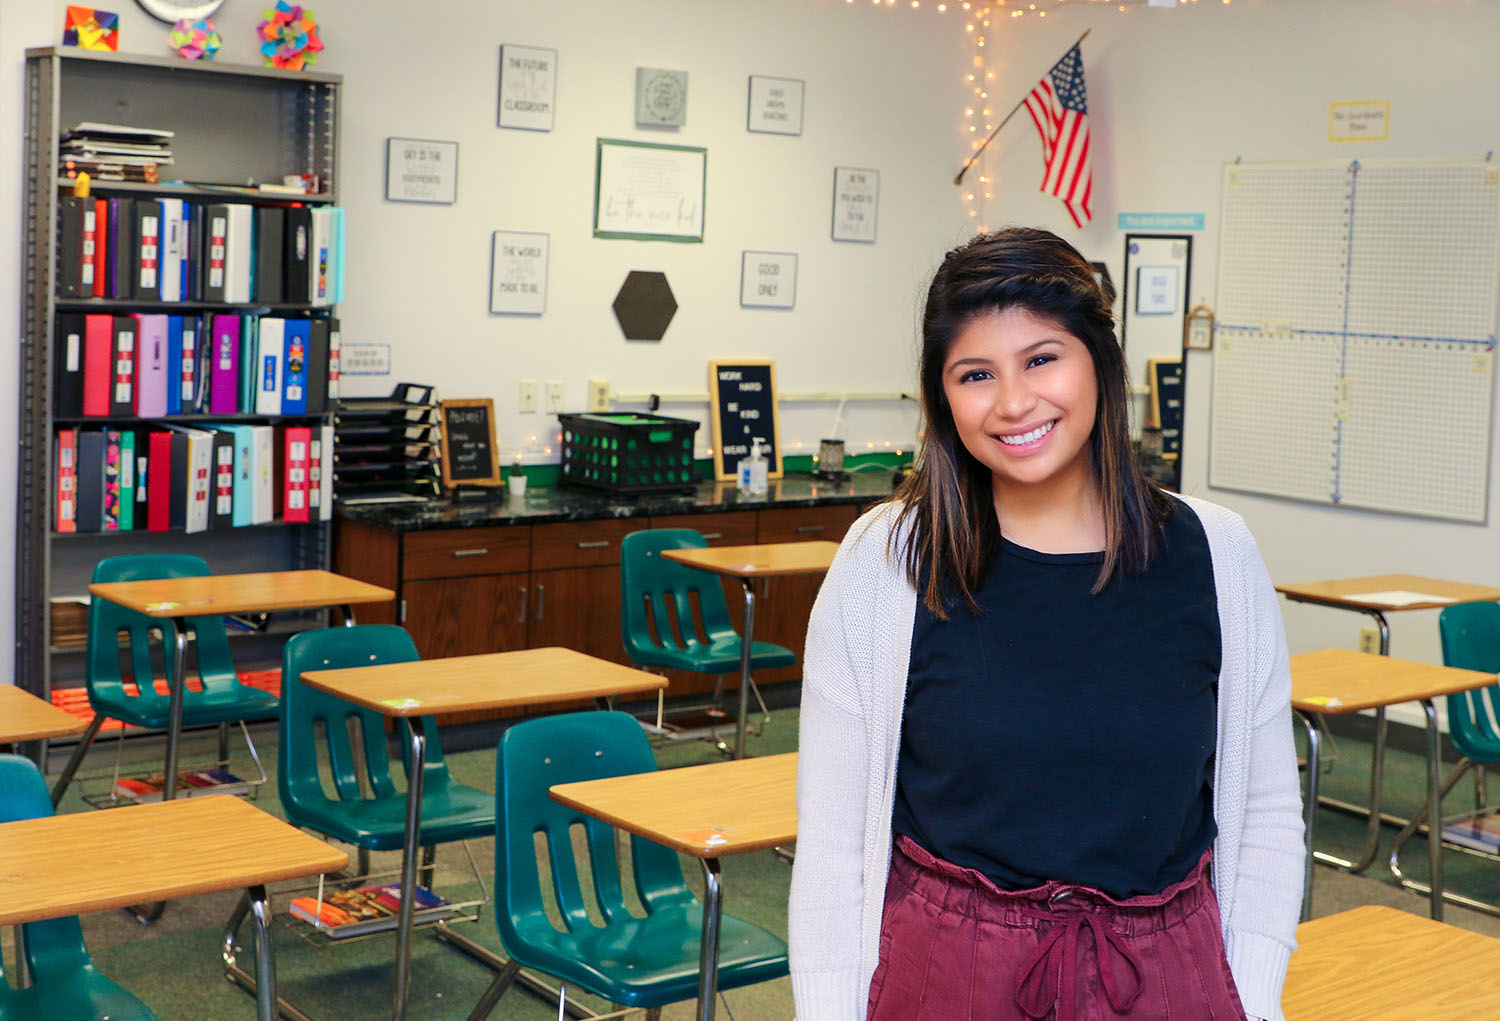 UNK graduate Odalys Cruz, a seventh-grade math and Spanish teacher at Schuyler Middle School, recently received the Rookie of the Year award from the Nebraska Association of Teachers of Mathematics. The award honors Nebraska math teachers in their first three years of service who demonstrate passion and excellence in math education.